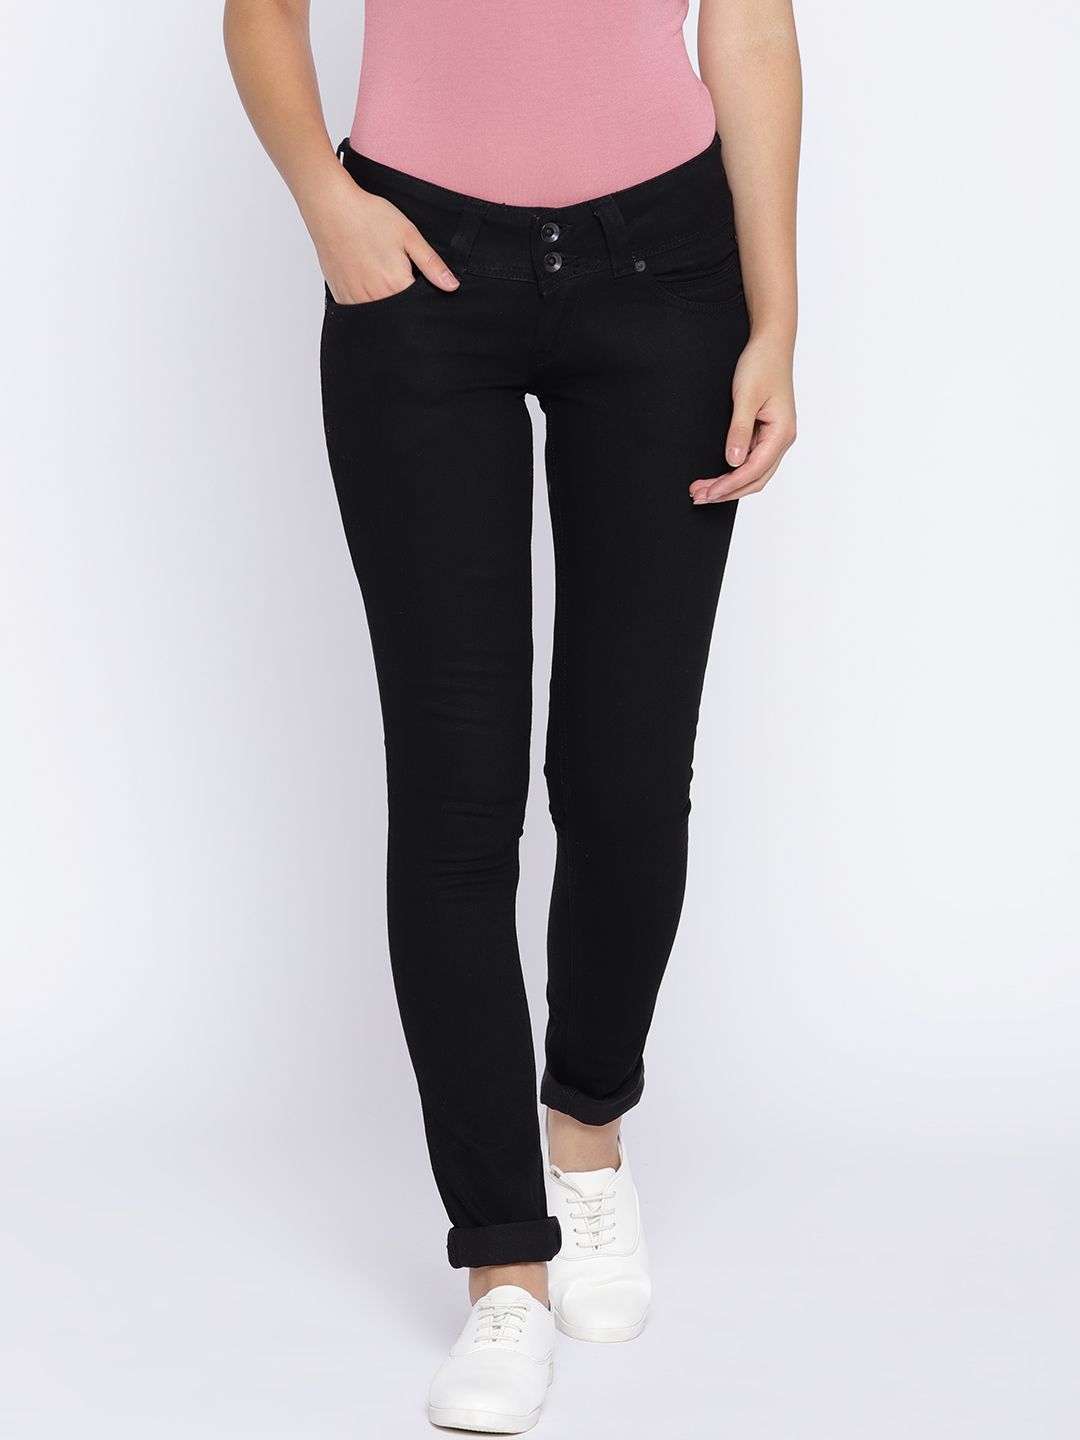 Pepe Jeans Women Black Pixie Fit Mid-Rise Clean Look Stretchable Jeans Price in India